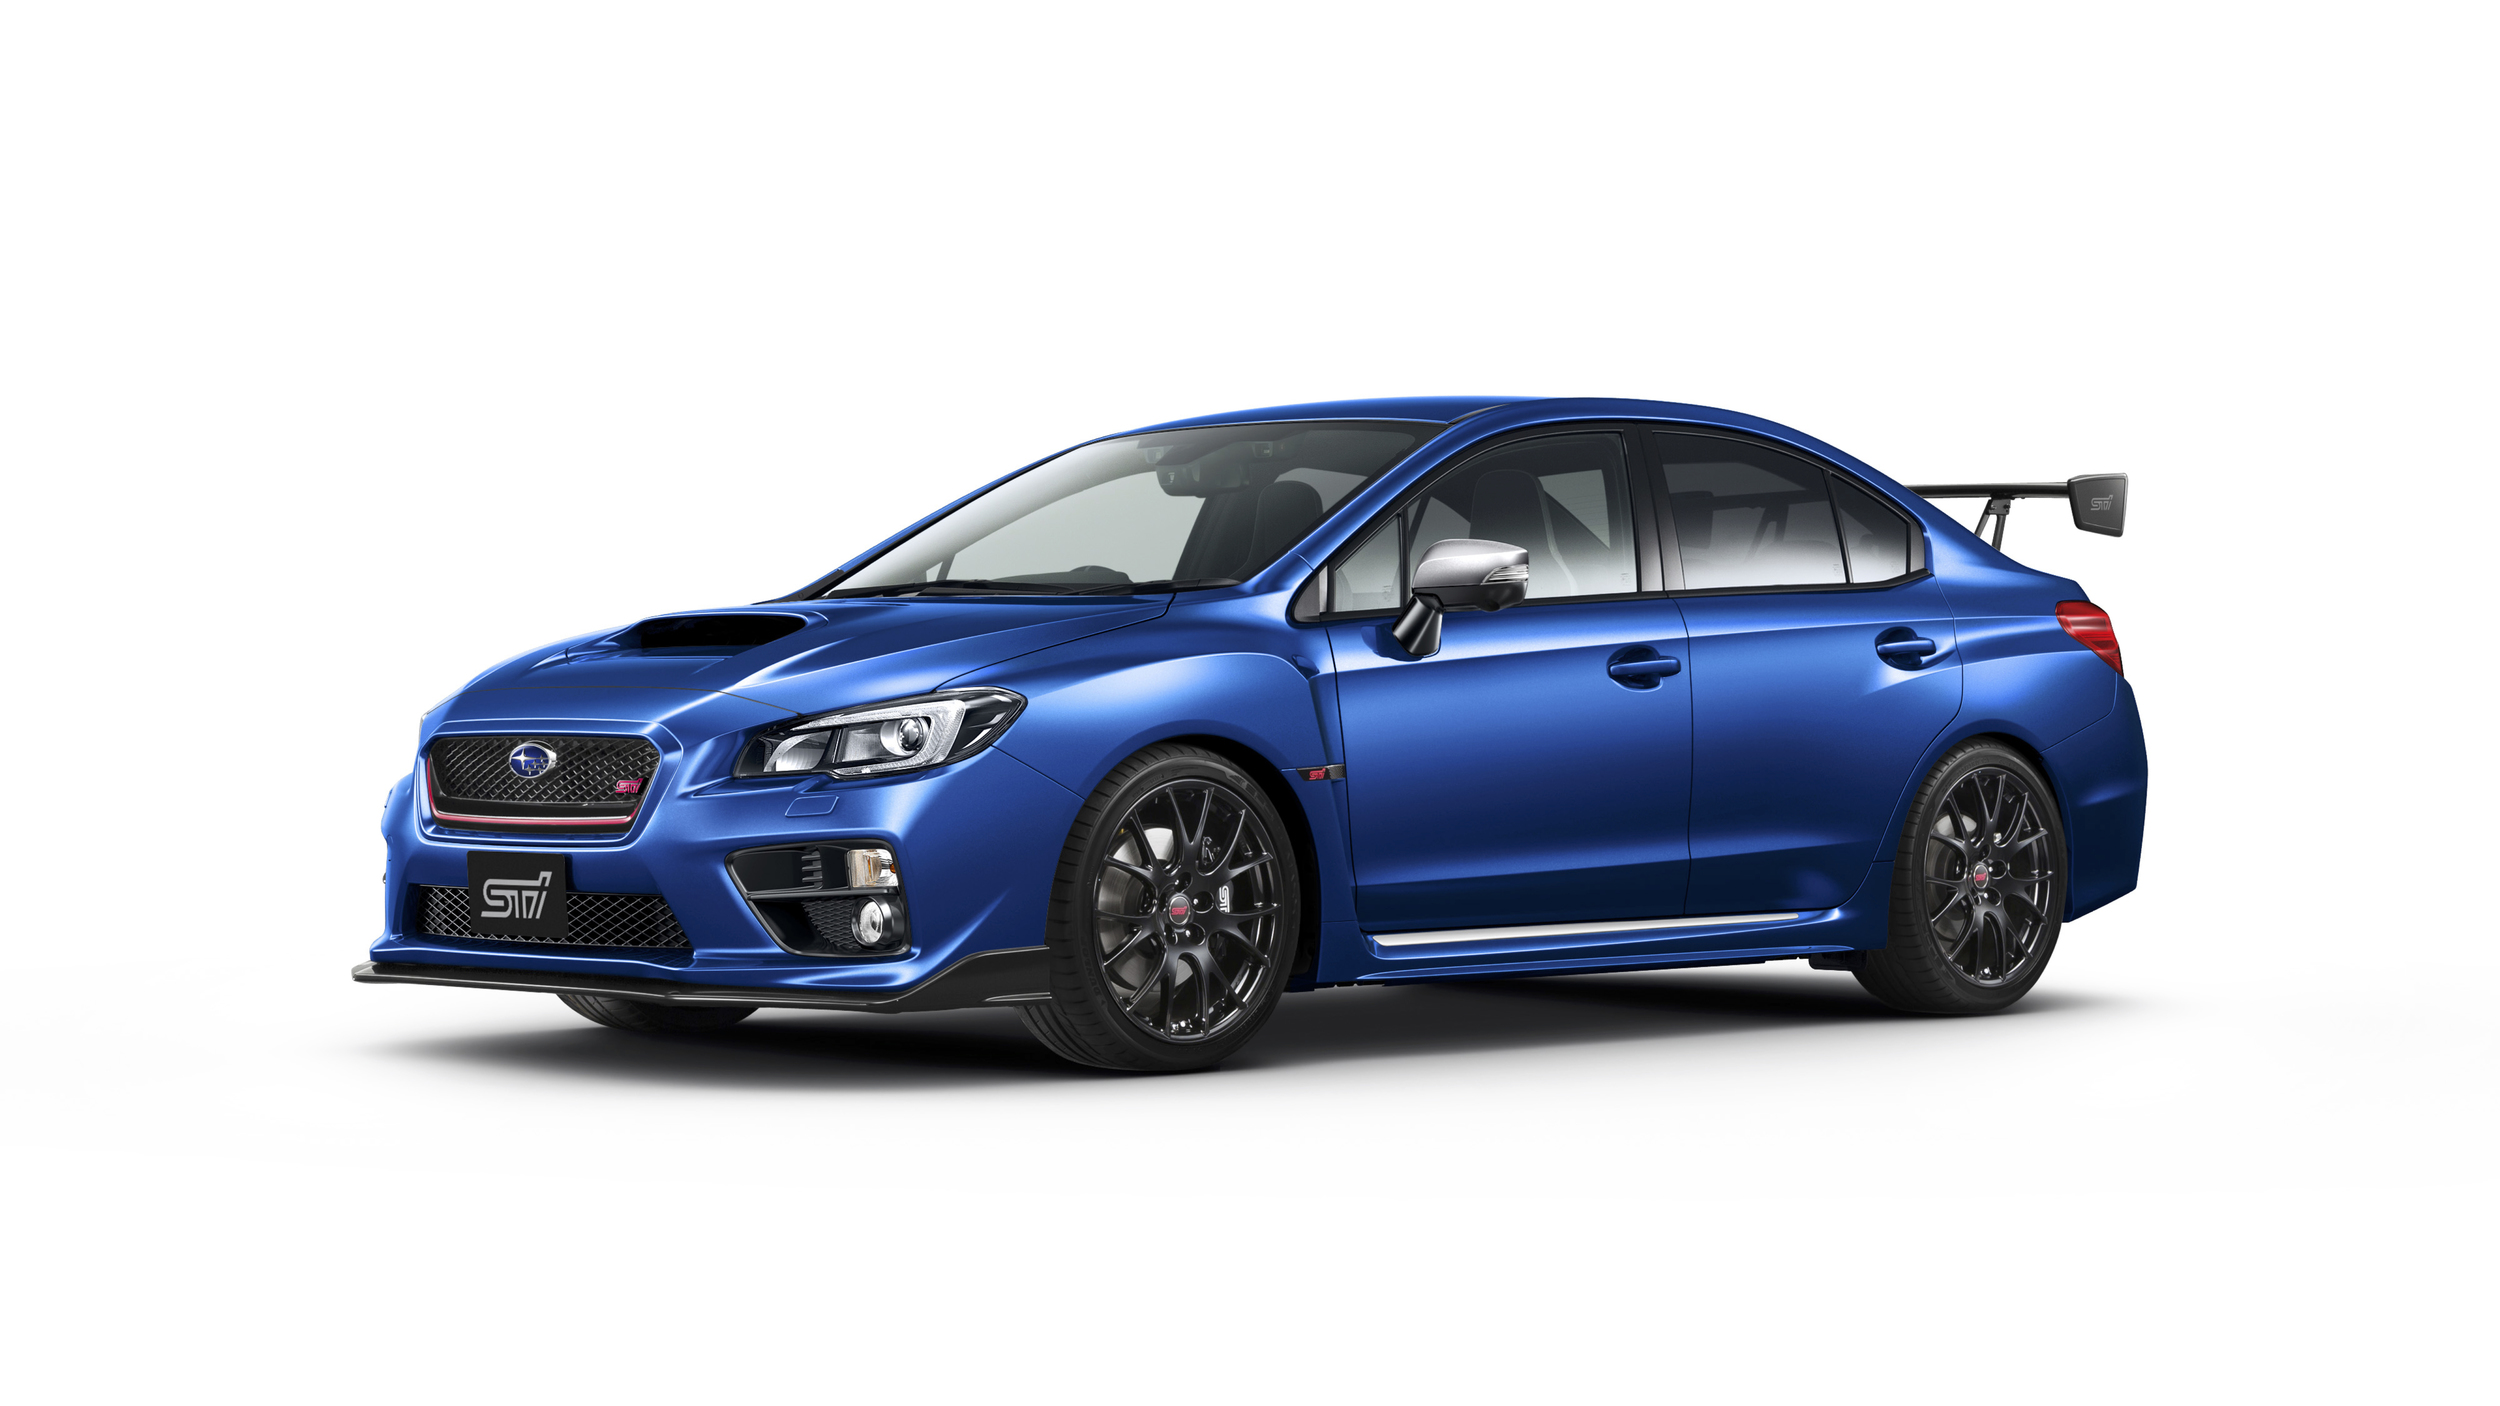 2017 Subaru WRX S4 tS Special Edition Launched In Japan - autoevolution